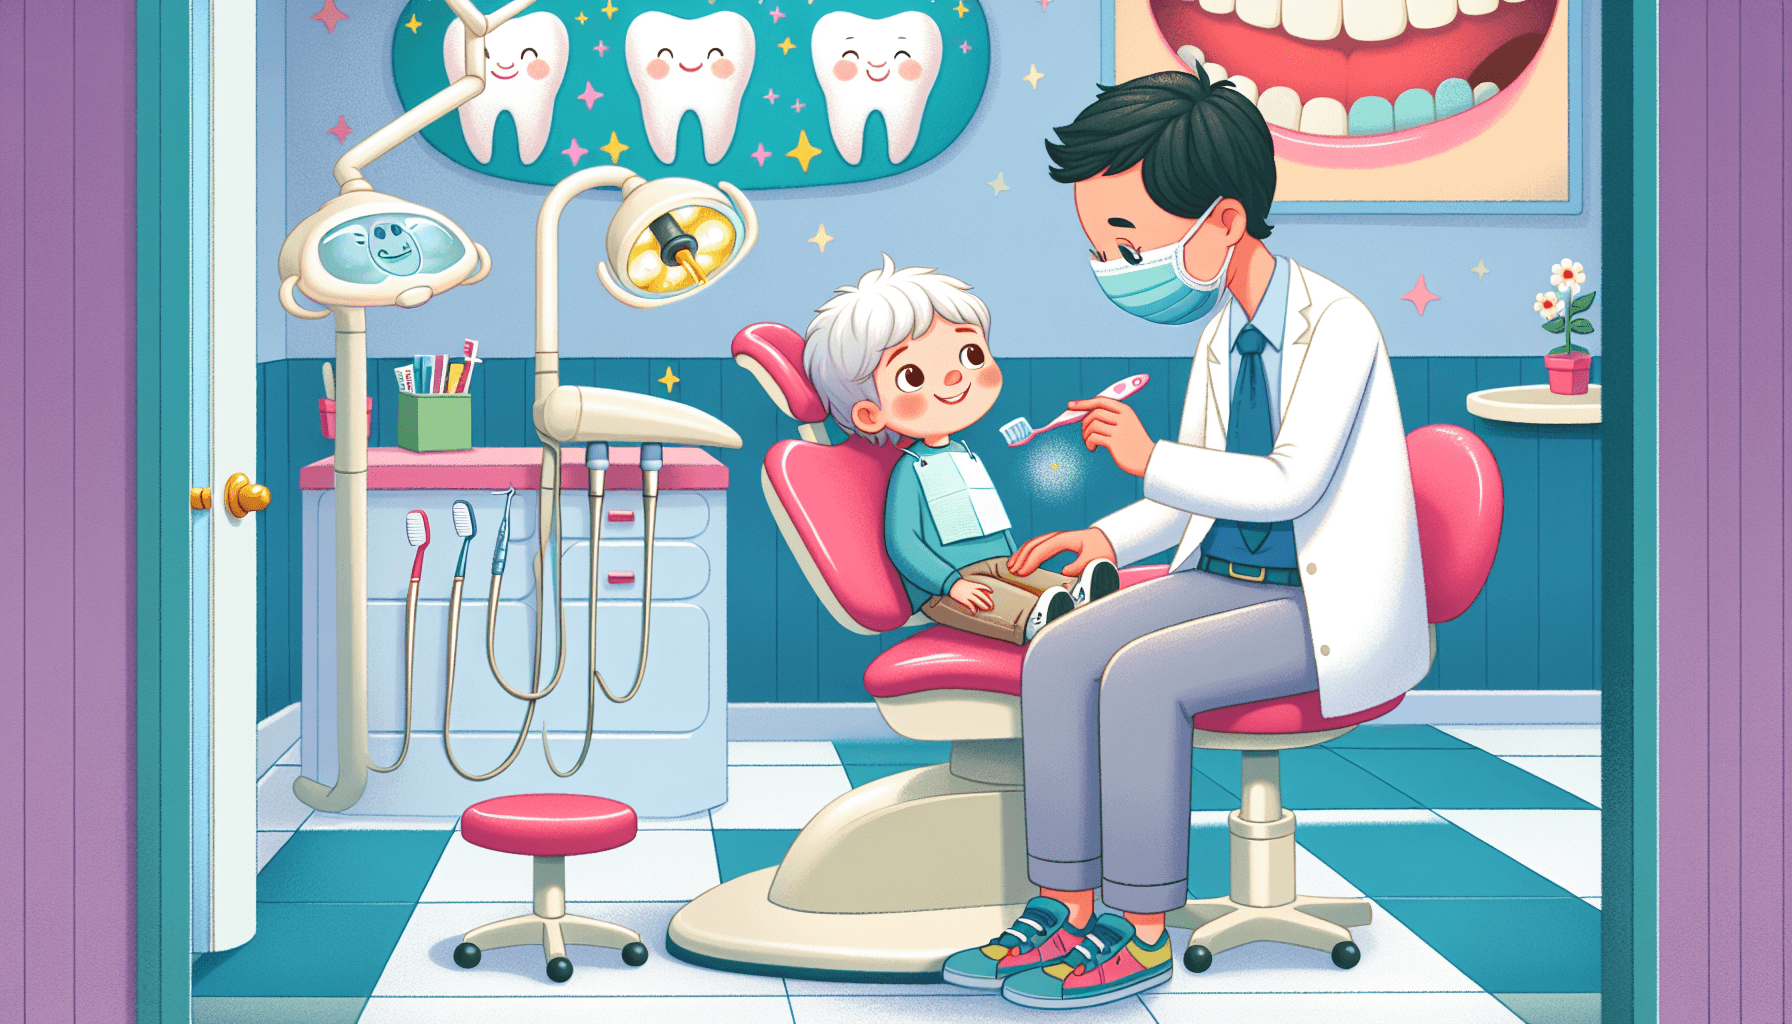 Illustration of a dentist interacting with a pediatric patient undergoing oral sedation